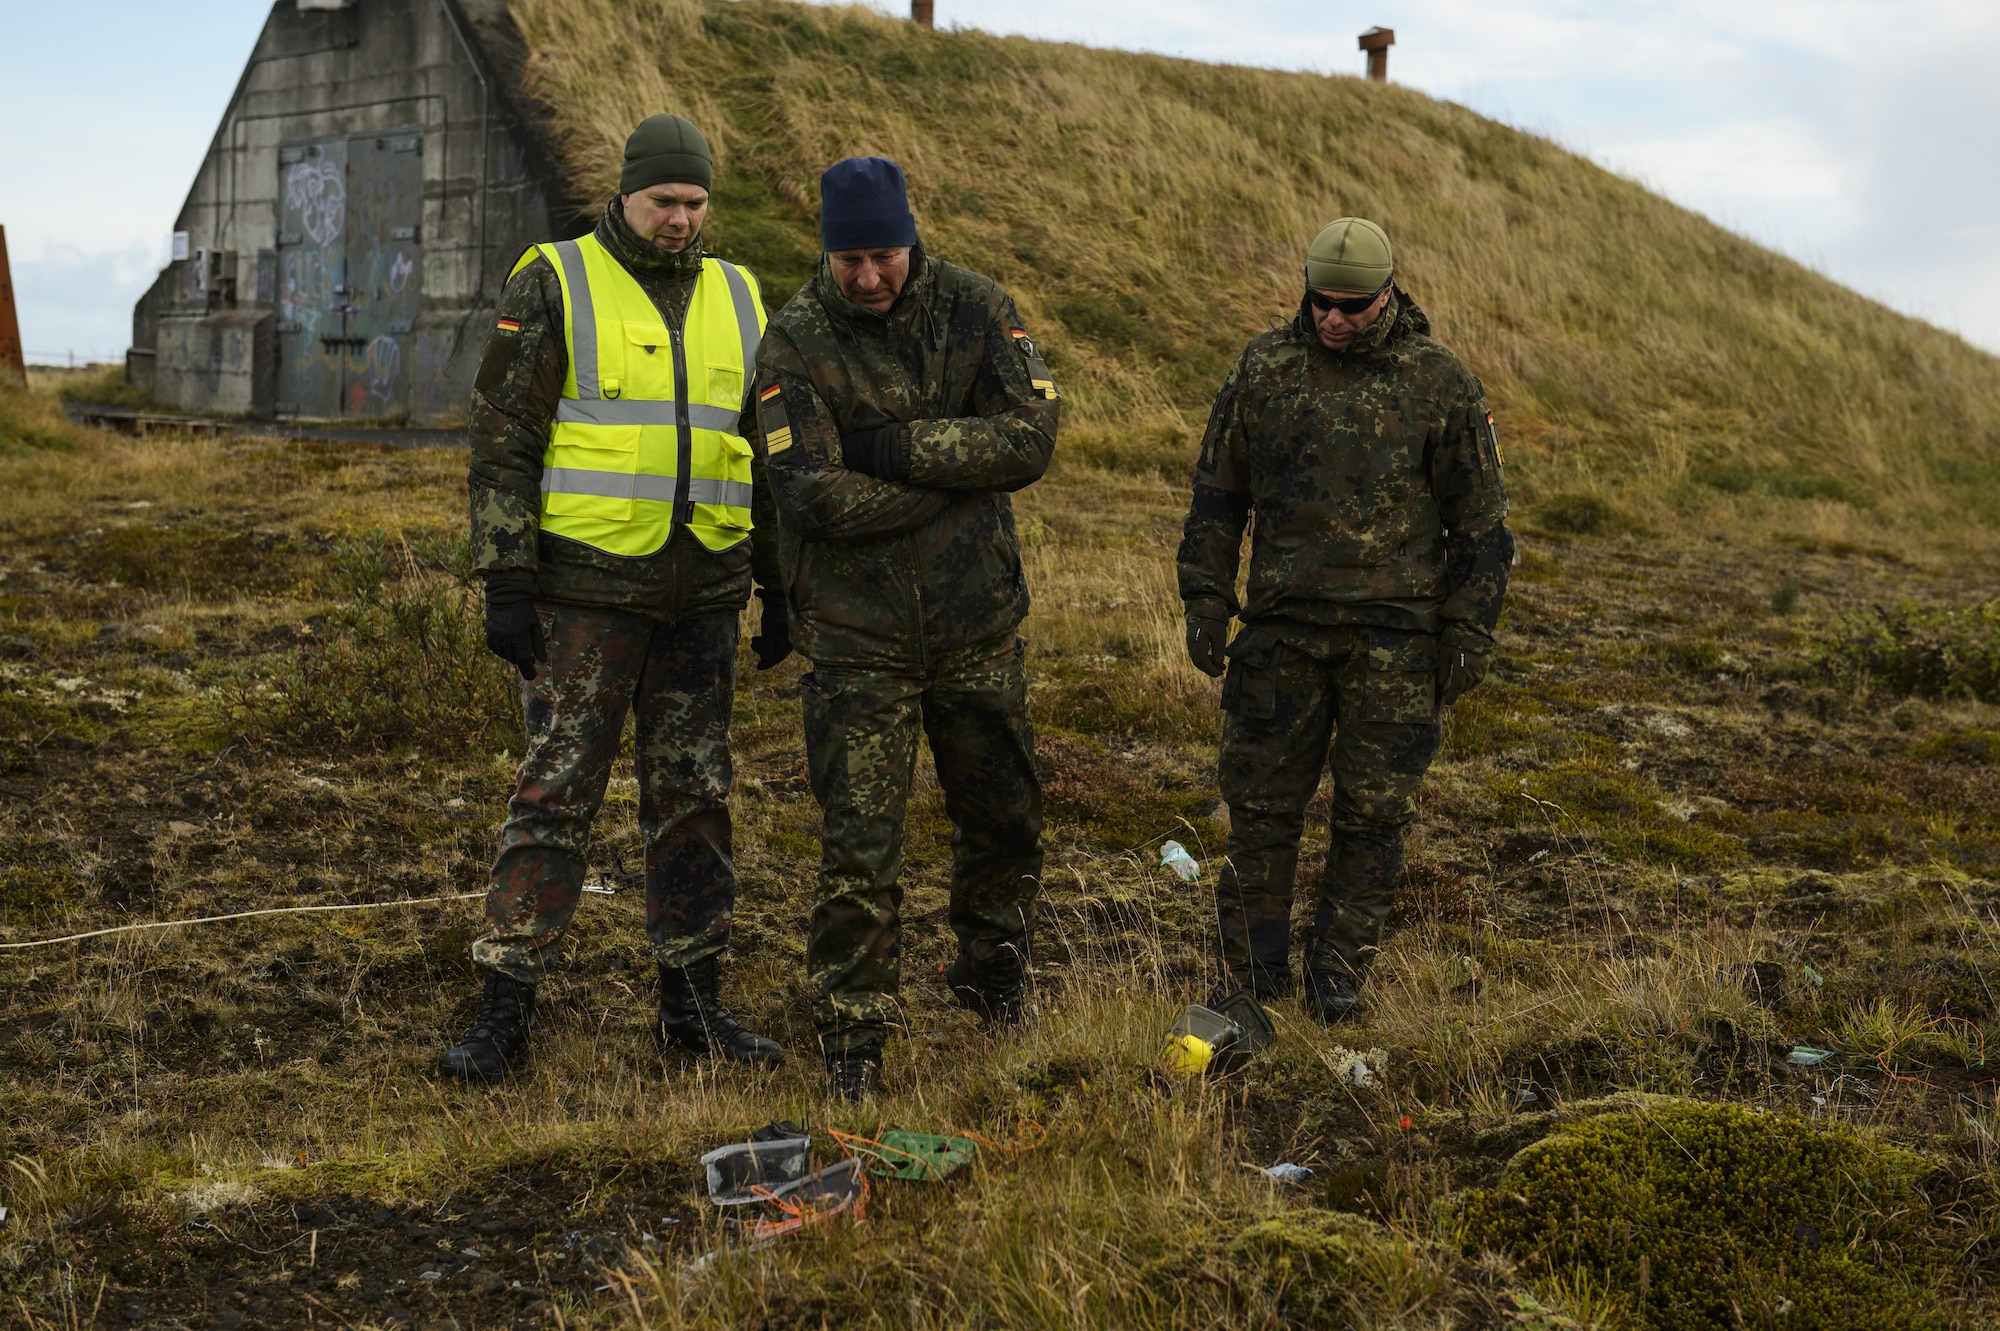 German military observers look at the remaining components of a detonated improvised explosive device during the Northern Challenge 16 exercise at Icelandic Coast Guard Keflavik Facility, Iceland, Sept. 19, 2016. During the exercise, 52nd EOD Airmen worked side by side with counterparts from allied and partner nations to become familiar with each other's military procedures and achieve greater interoperability in combating terrorism. (U.S. Air Force photo by Staff Sgt. Jonathan Snyder)                                                                                                                                                                                    